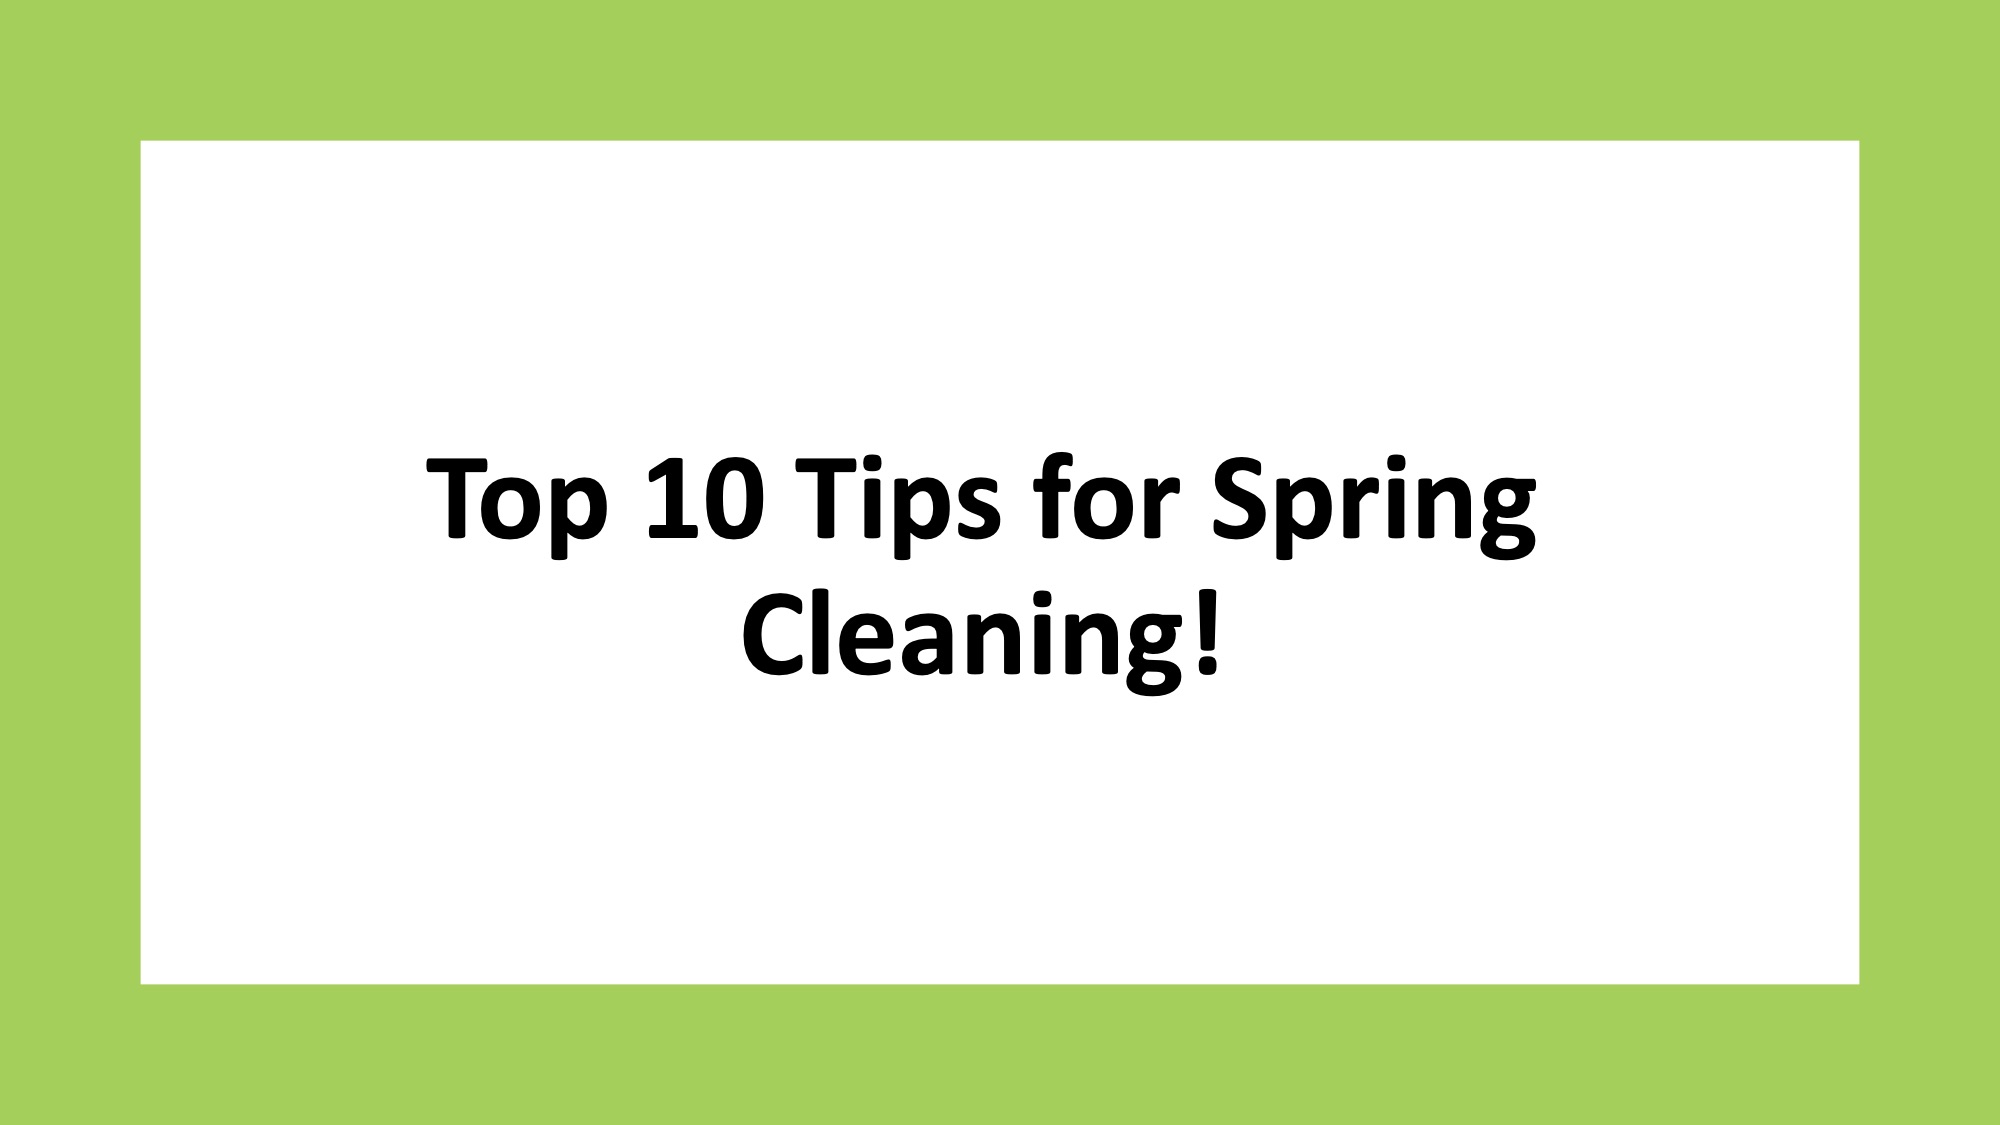 Top 10 Tips for Spring Cleaning!